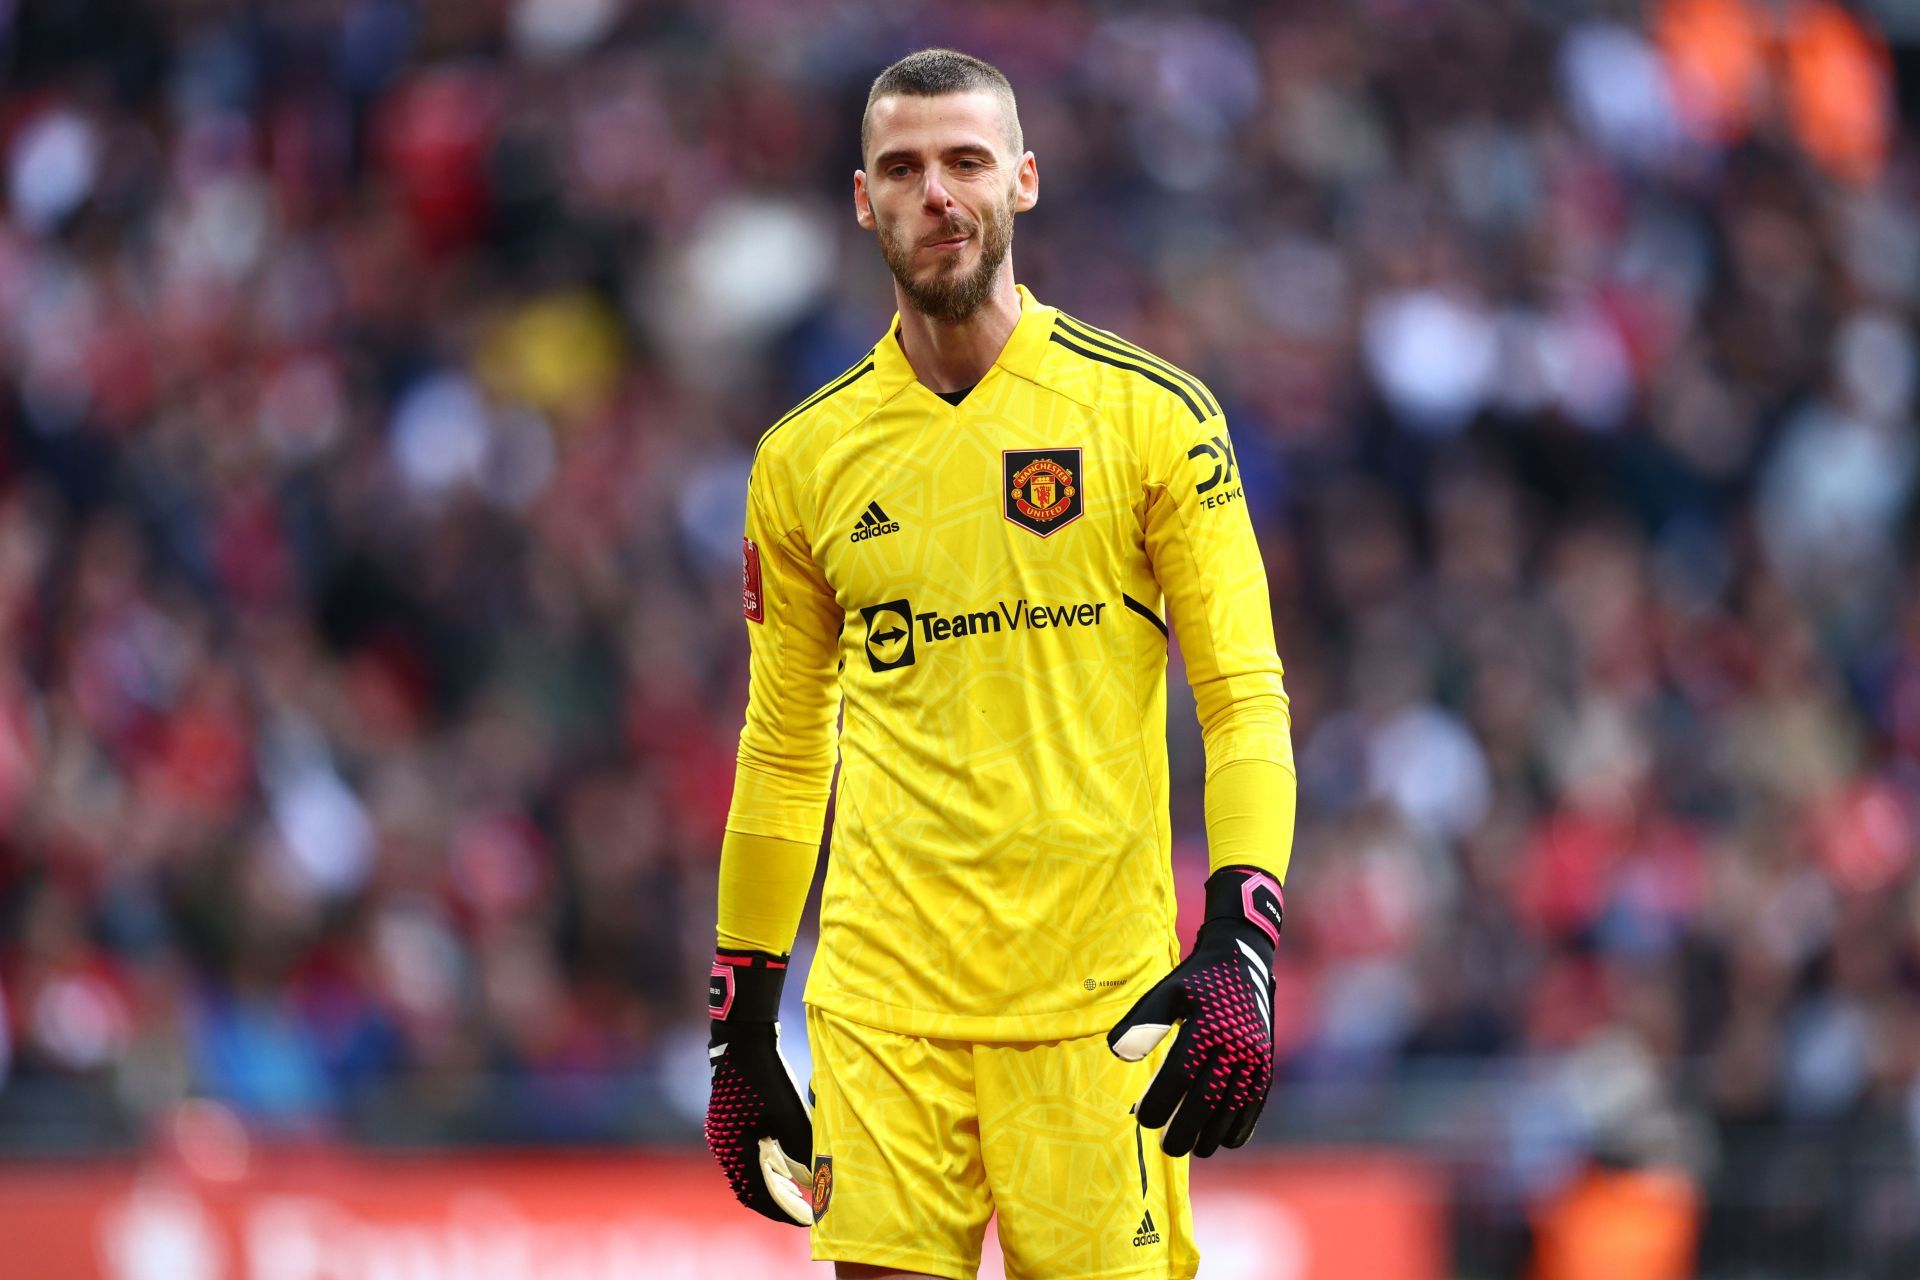 David de Gea committed another blunder over the weekend against West Ham United/